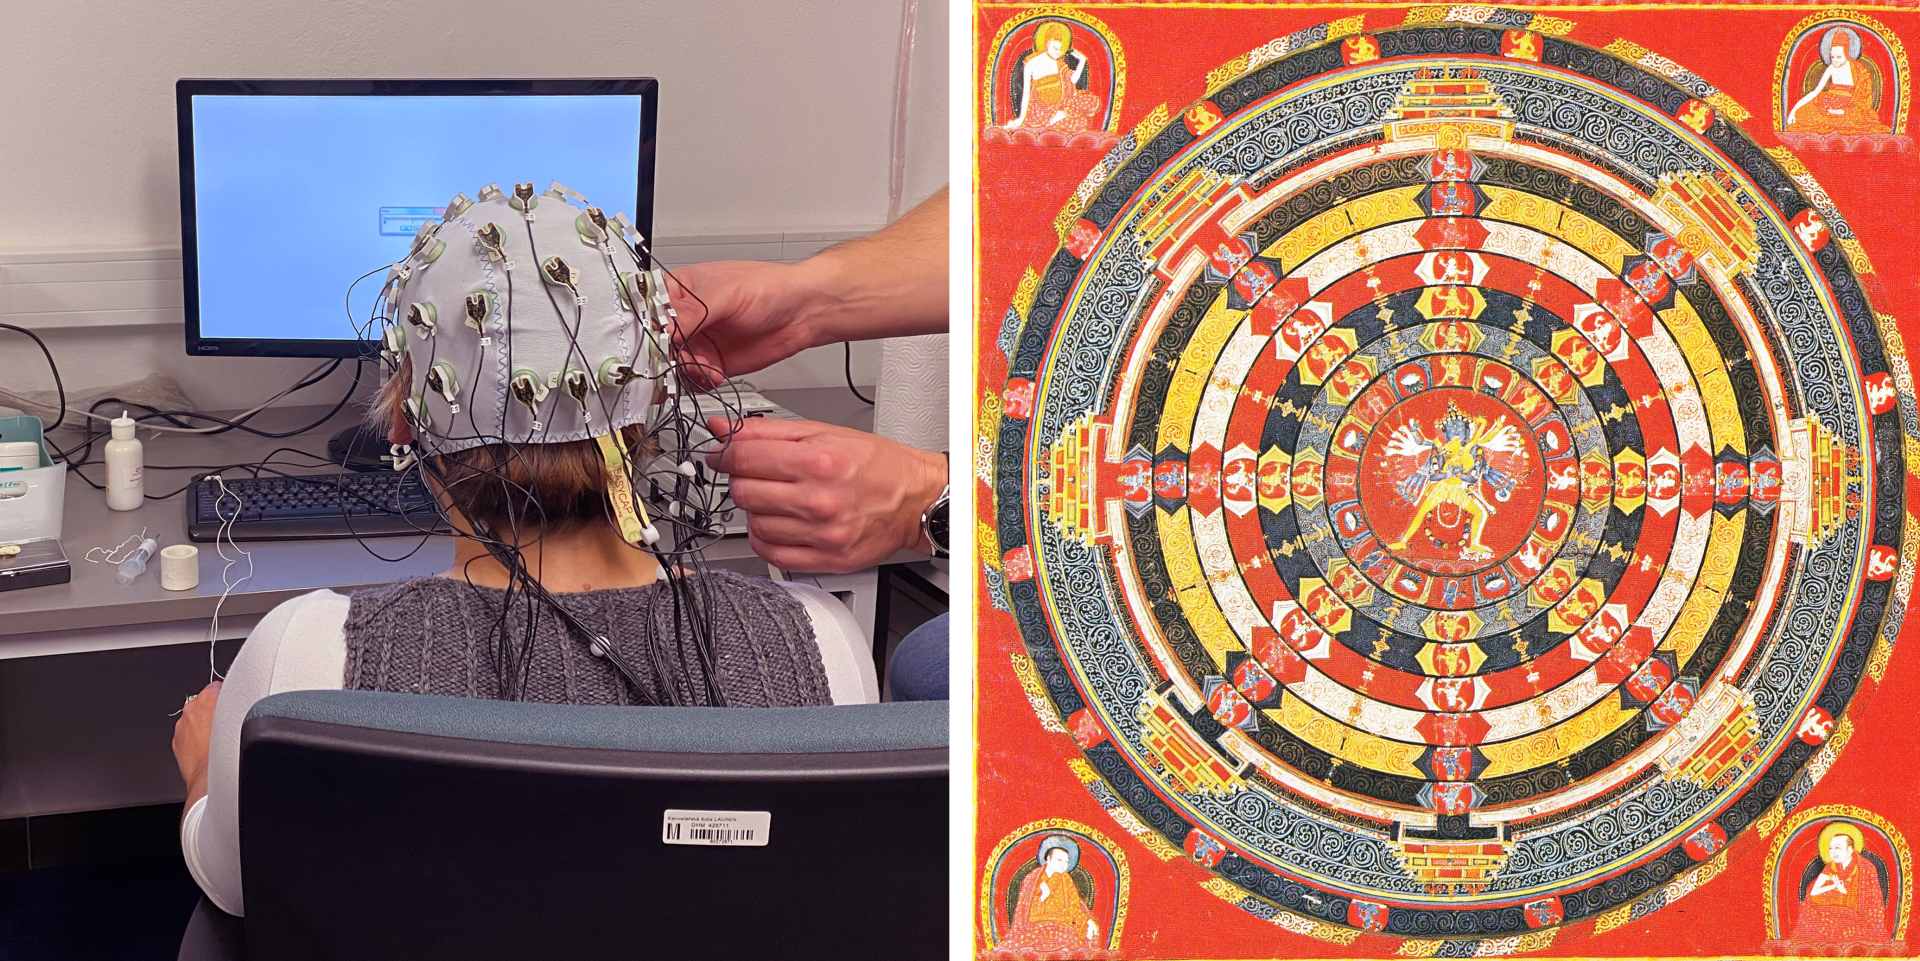 Effect of the perception of specific visual patterns of Buddhist mandalas on brain activity picture